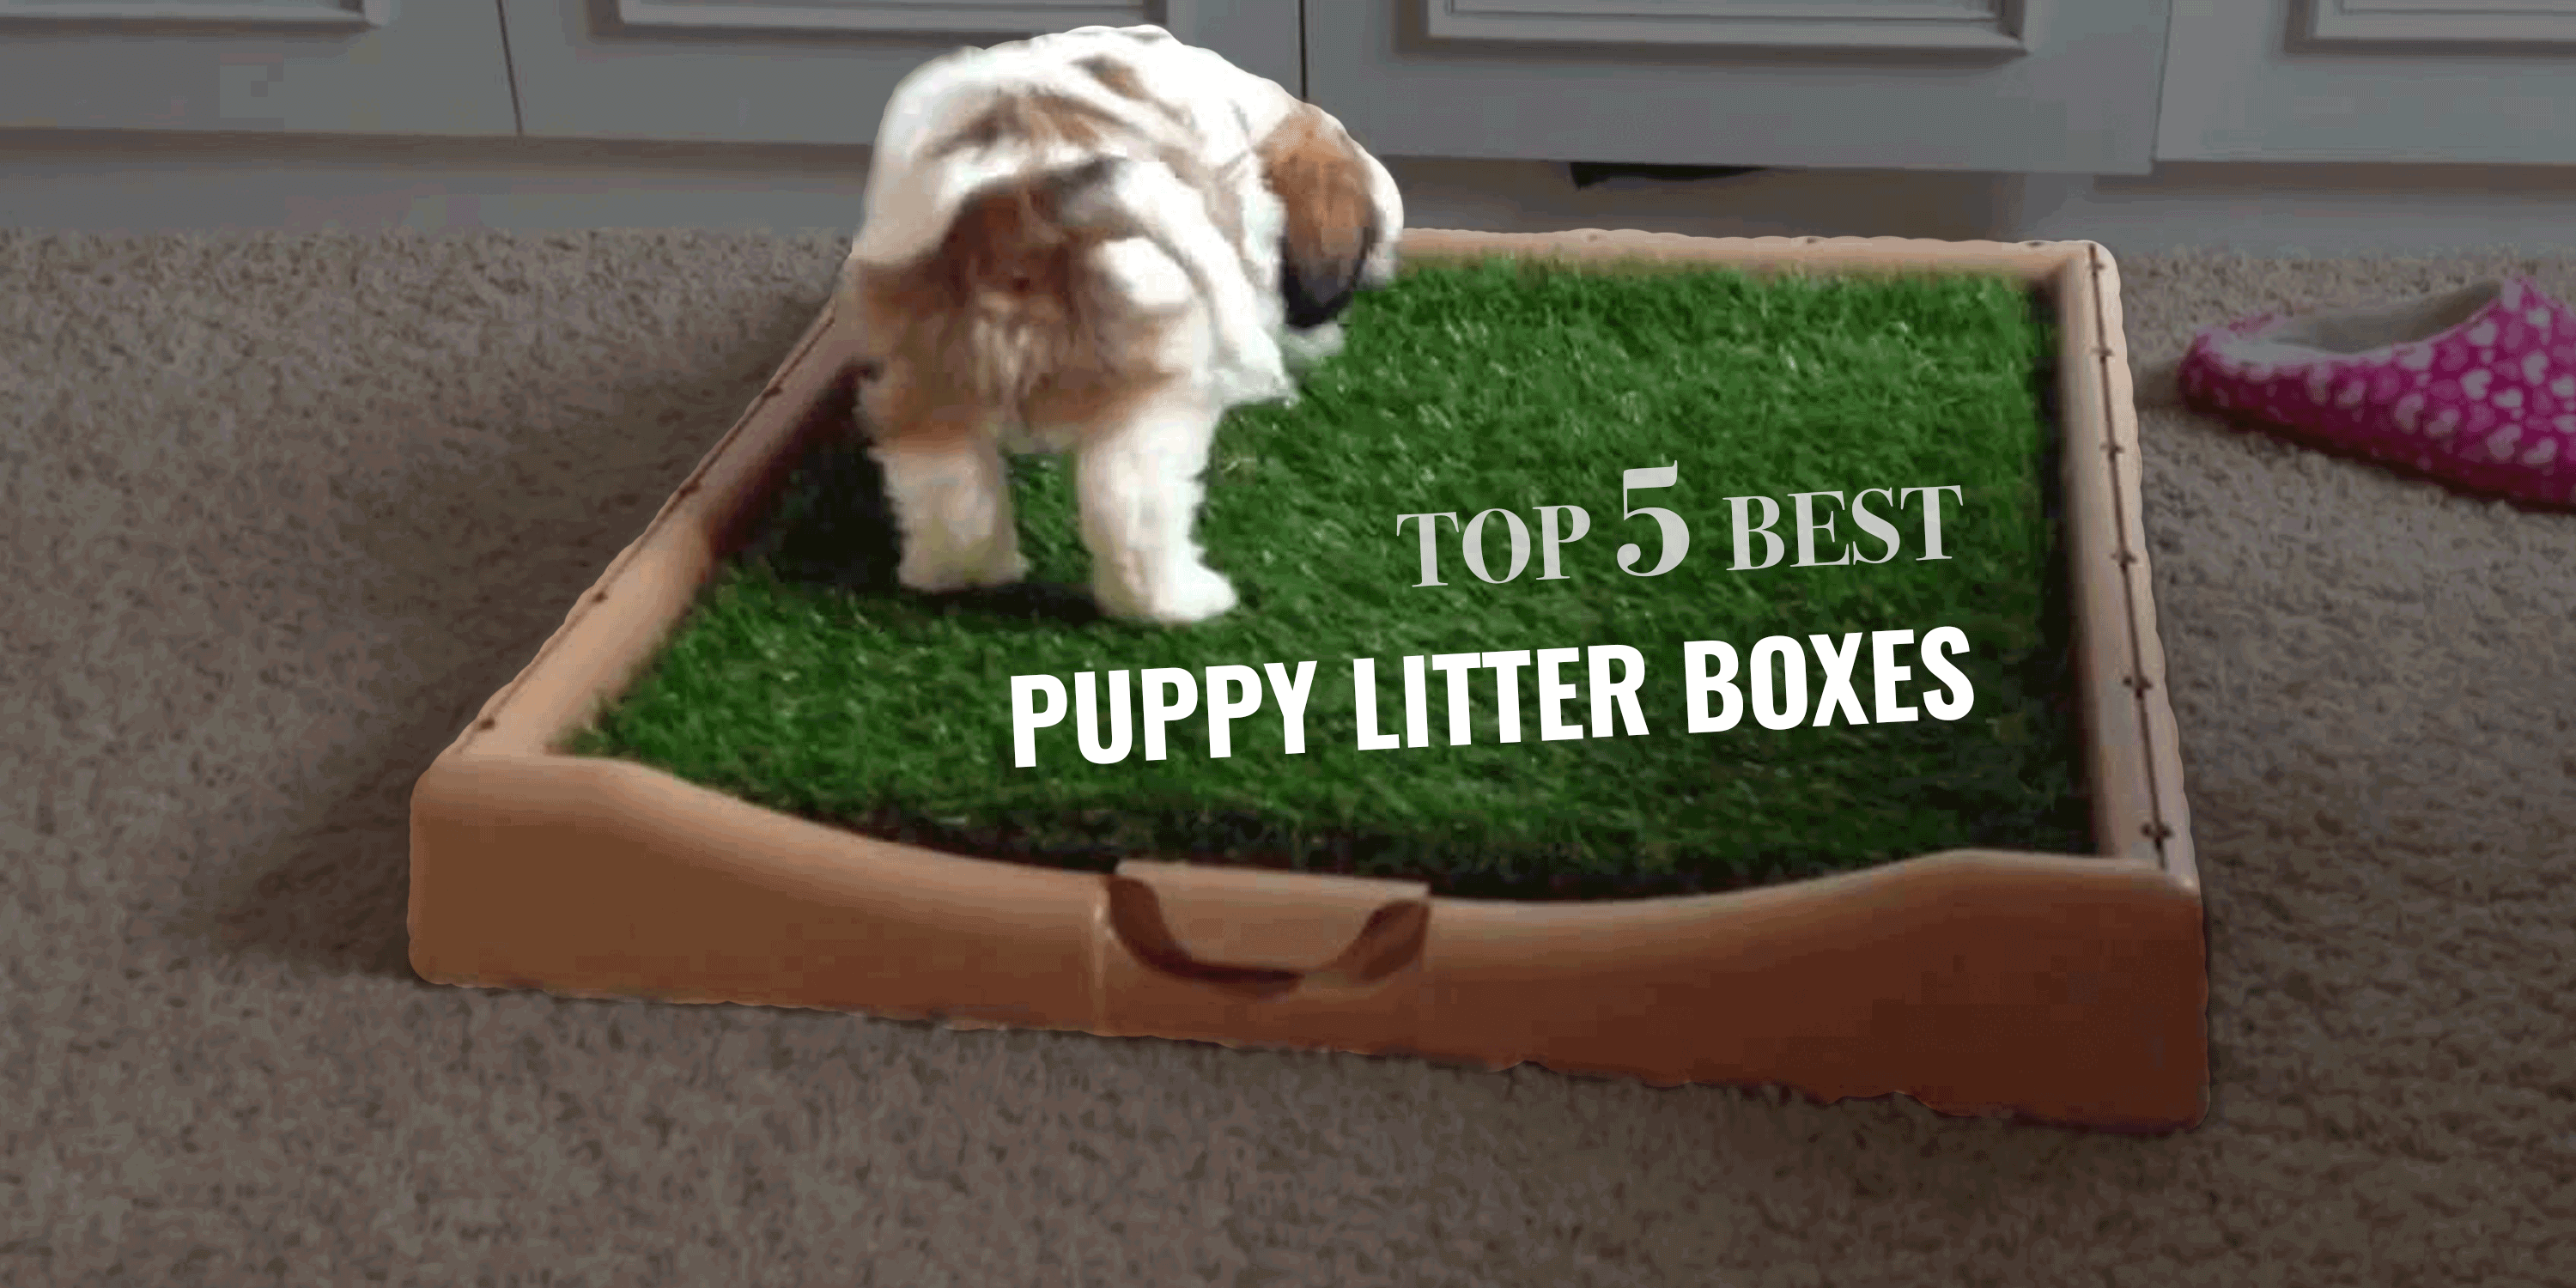 dogs that can use a litter box